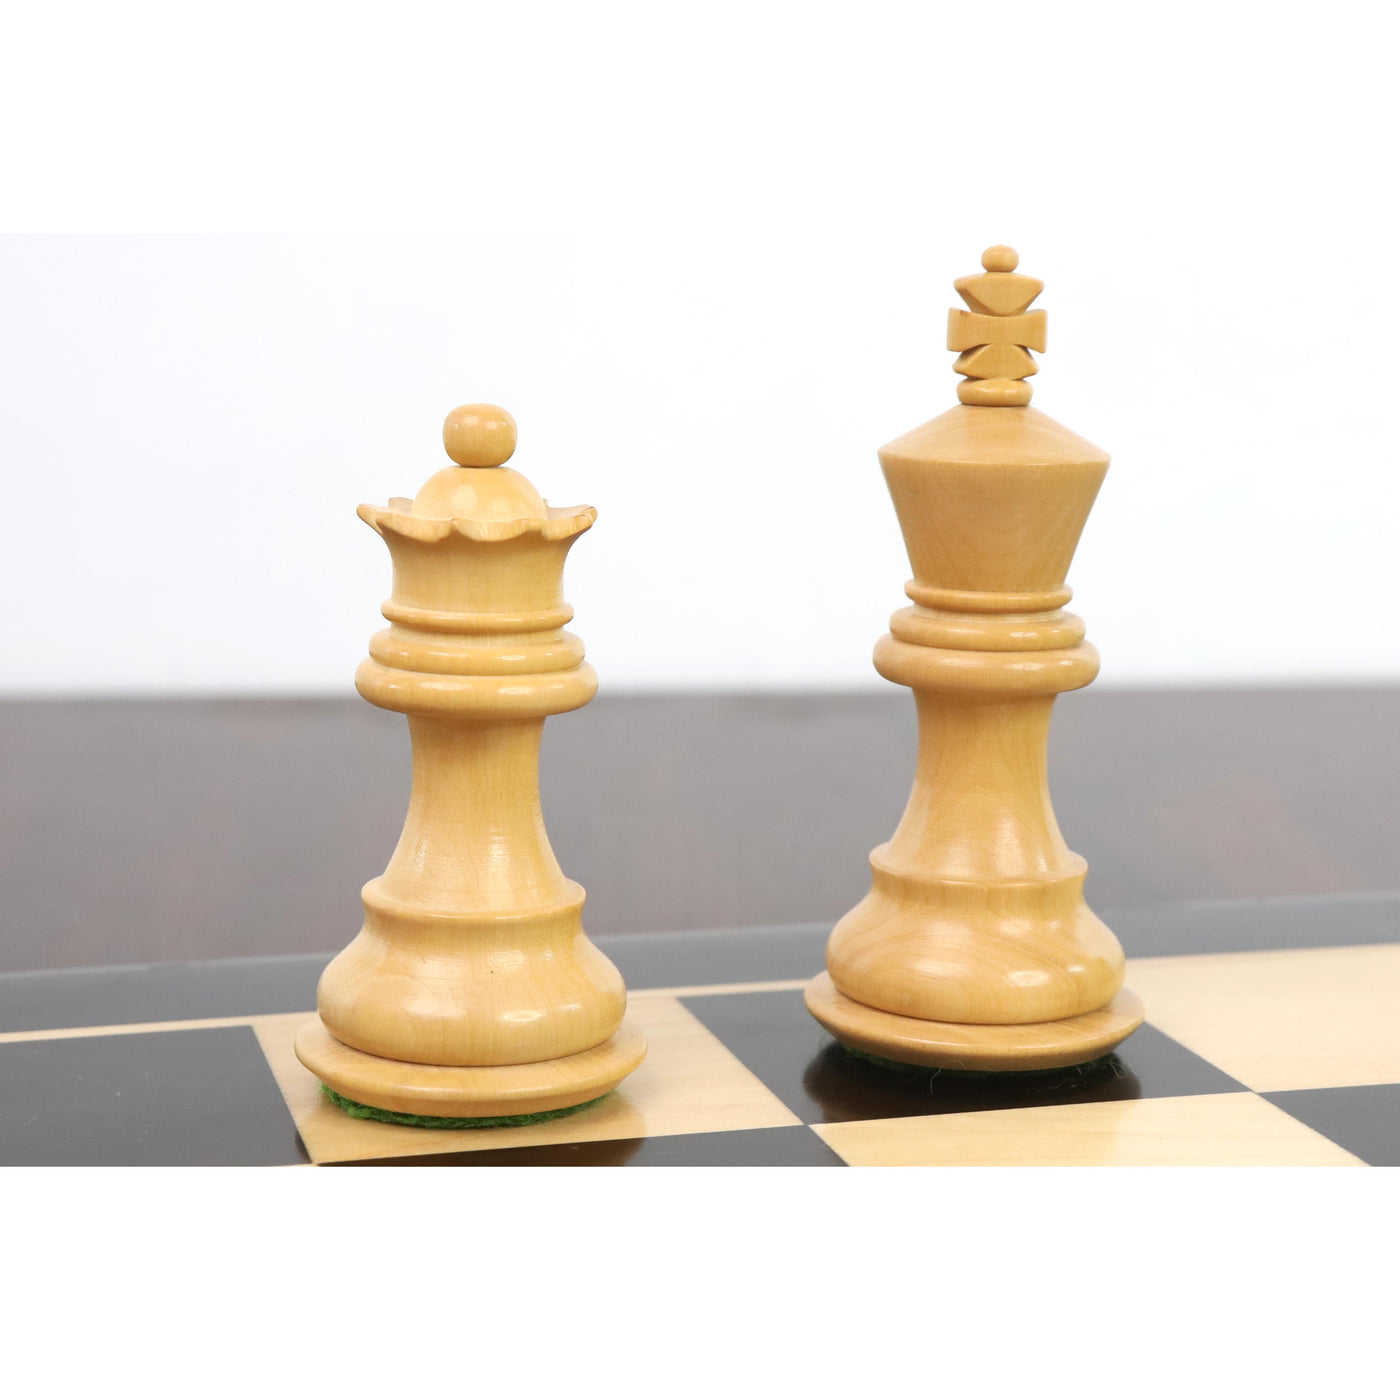 3.1" Pro Staunton Luxury Chess Pieces Only set - Triple Weighted Ebony Wood